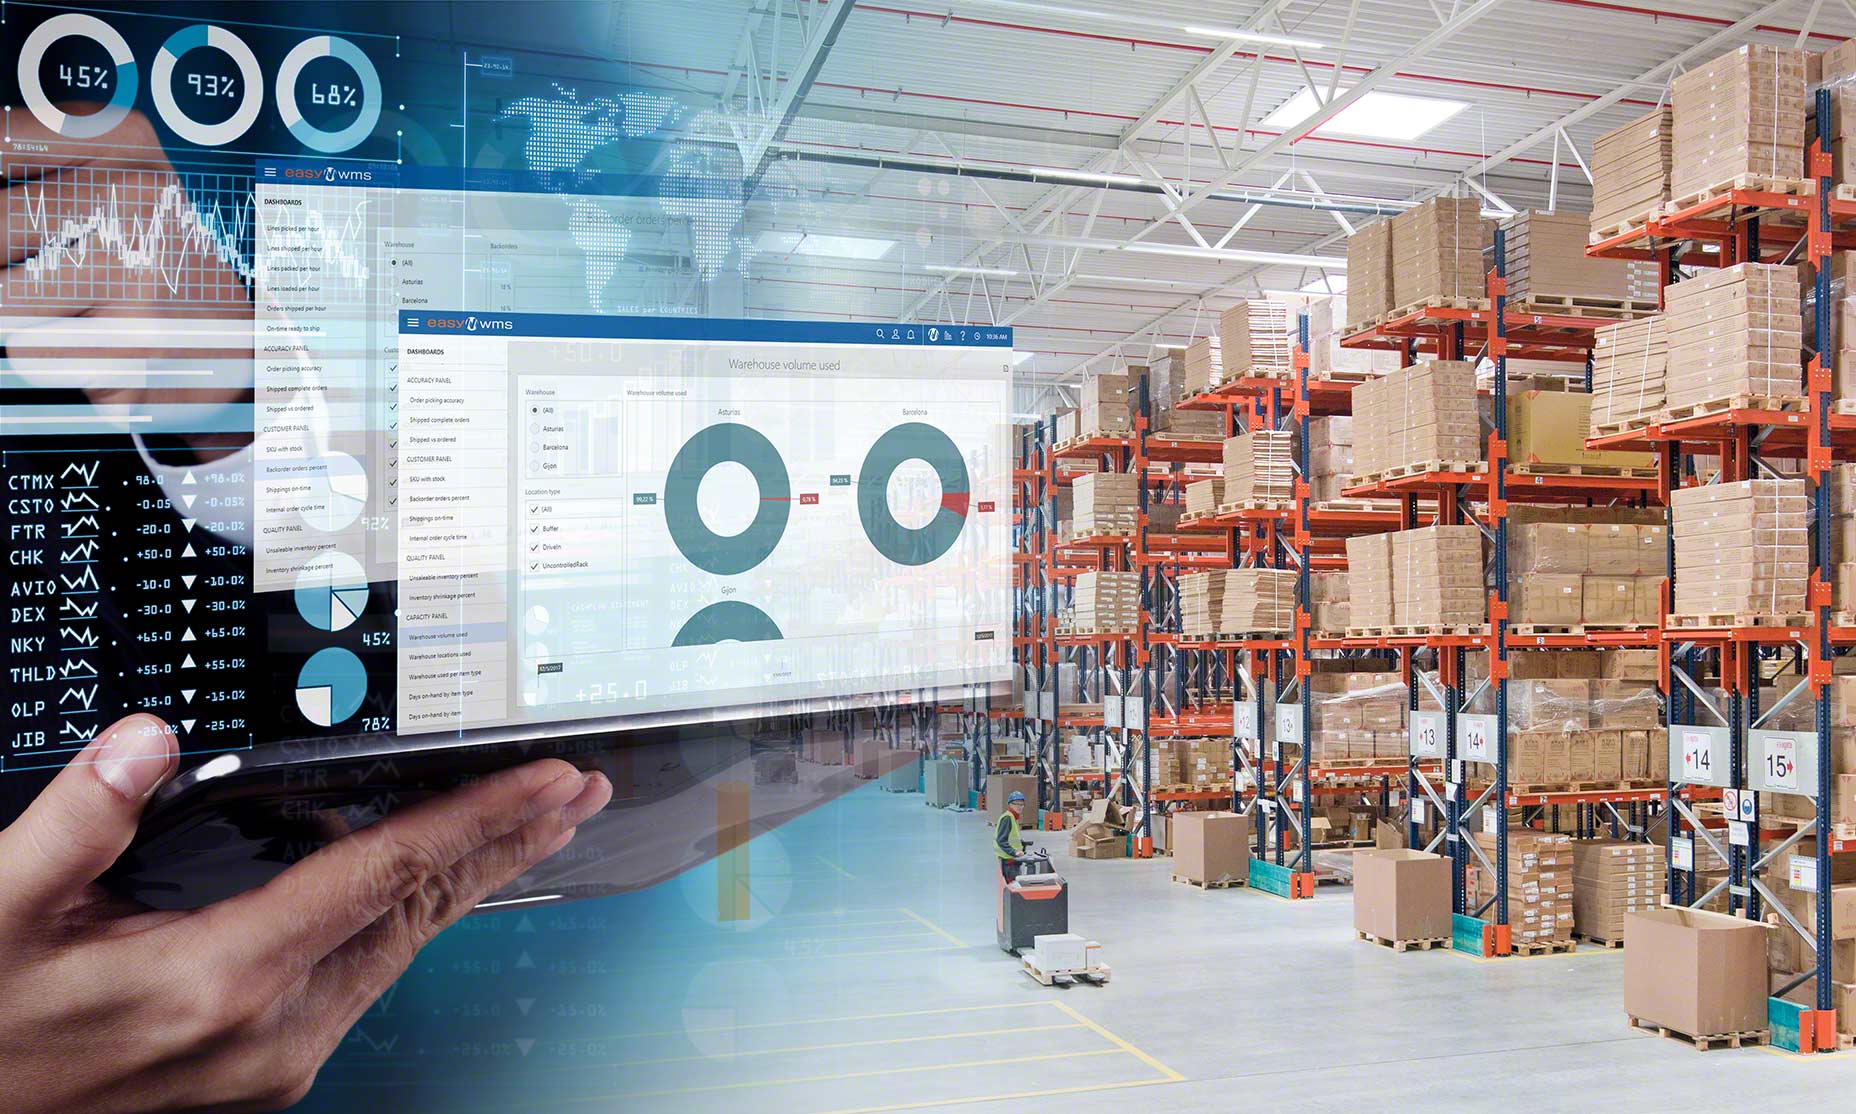 3PL warehouse software is a program that coordinates all operations in a 3PL facility